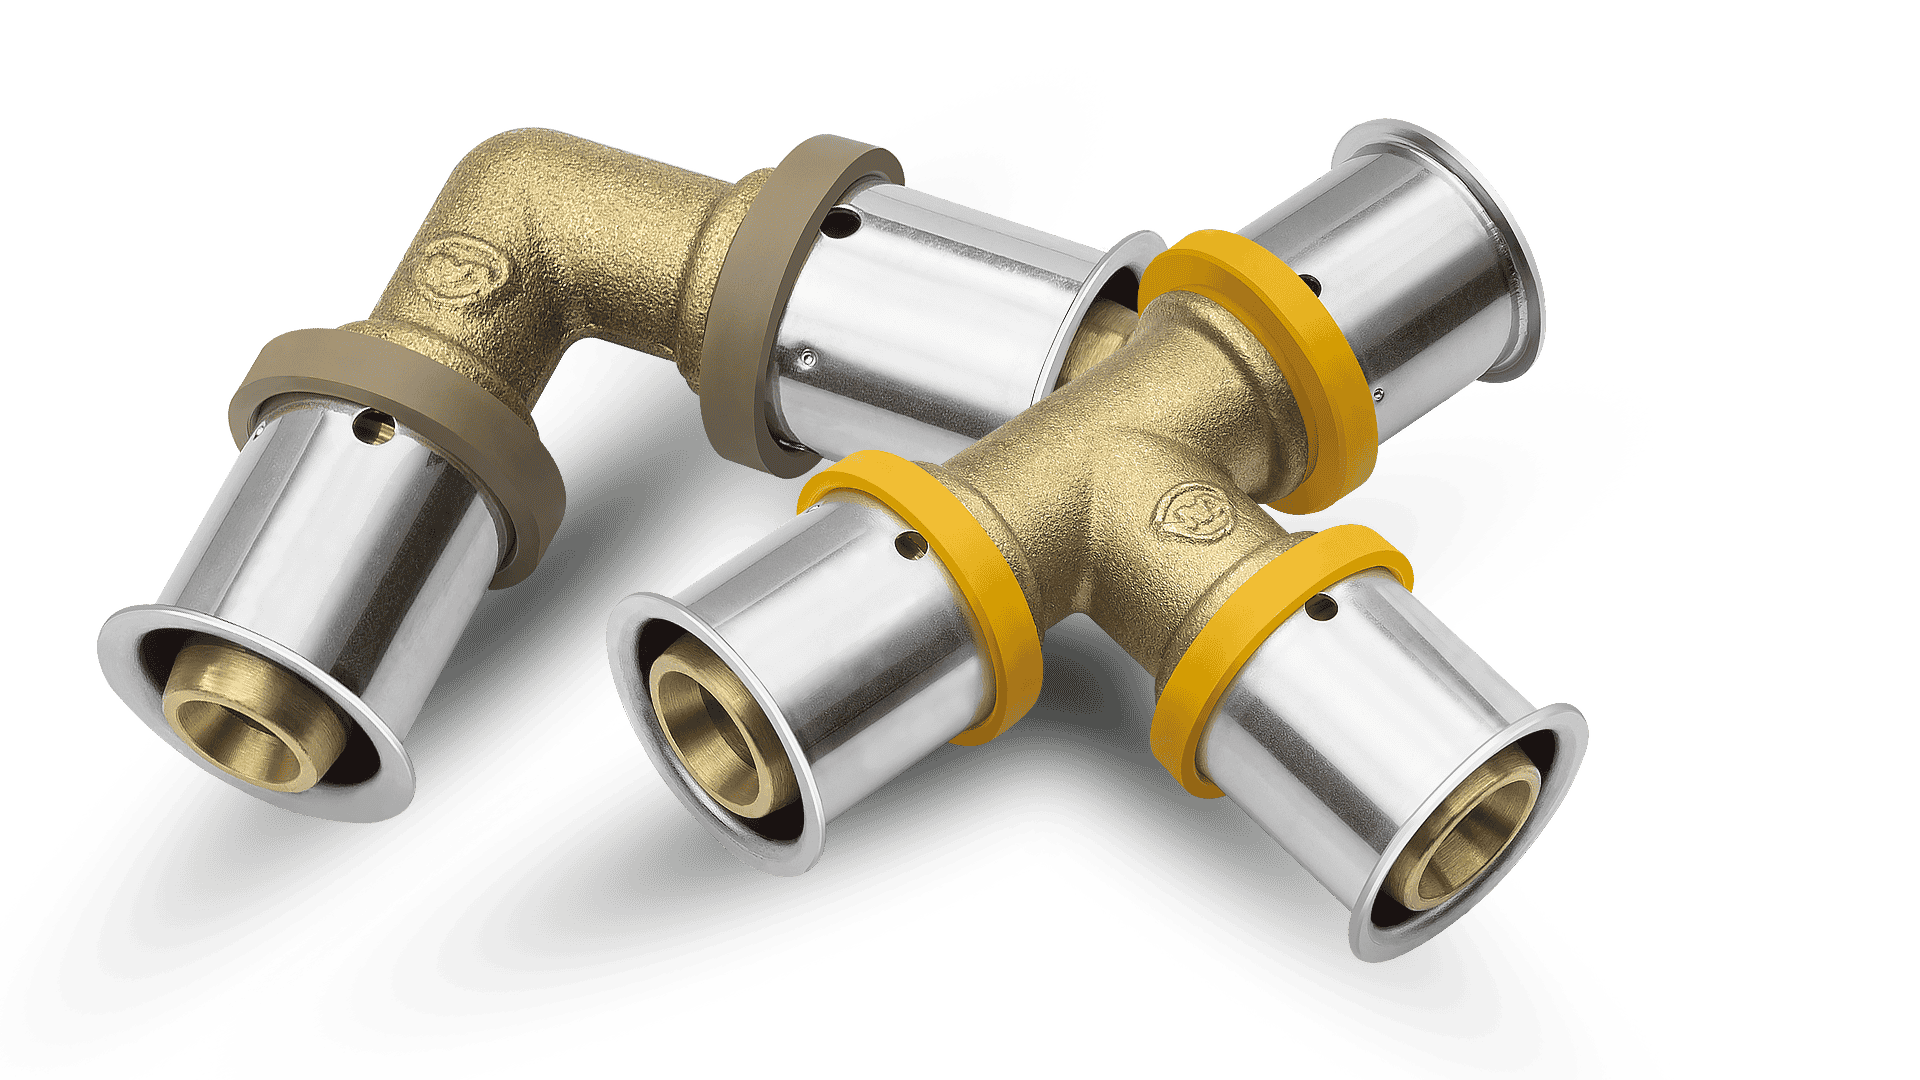 KAN-therm - UltraPRESS system - Tee and elbow type fittings.